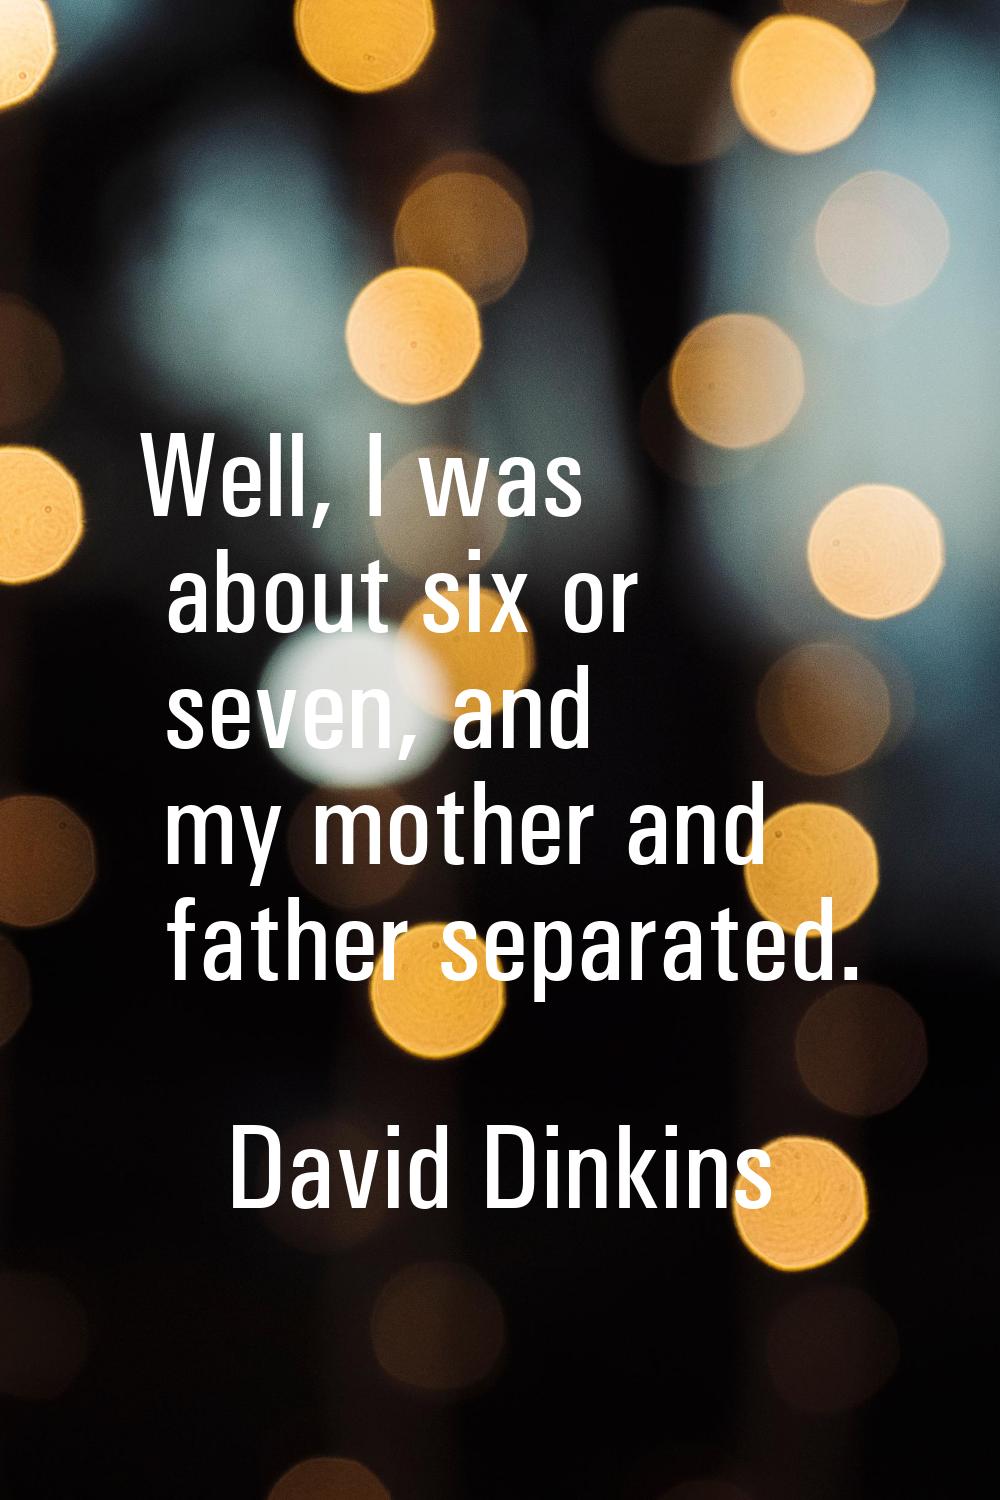 Well, I was about six or seven, and my mother and father separated.